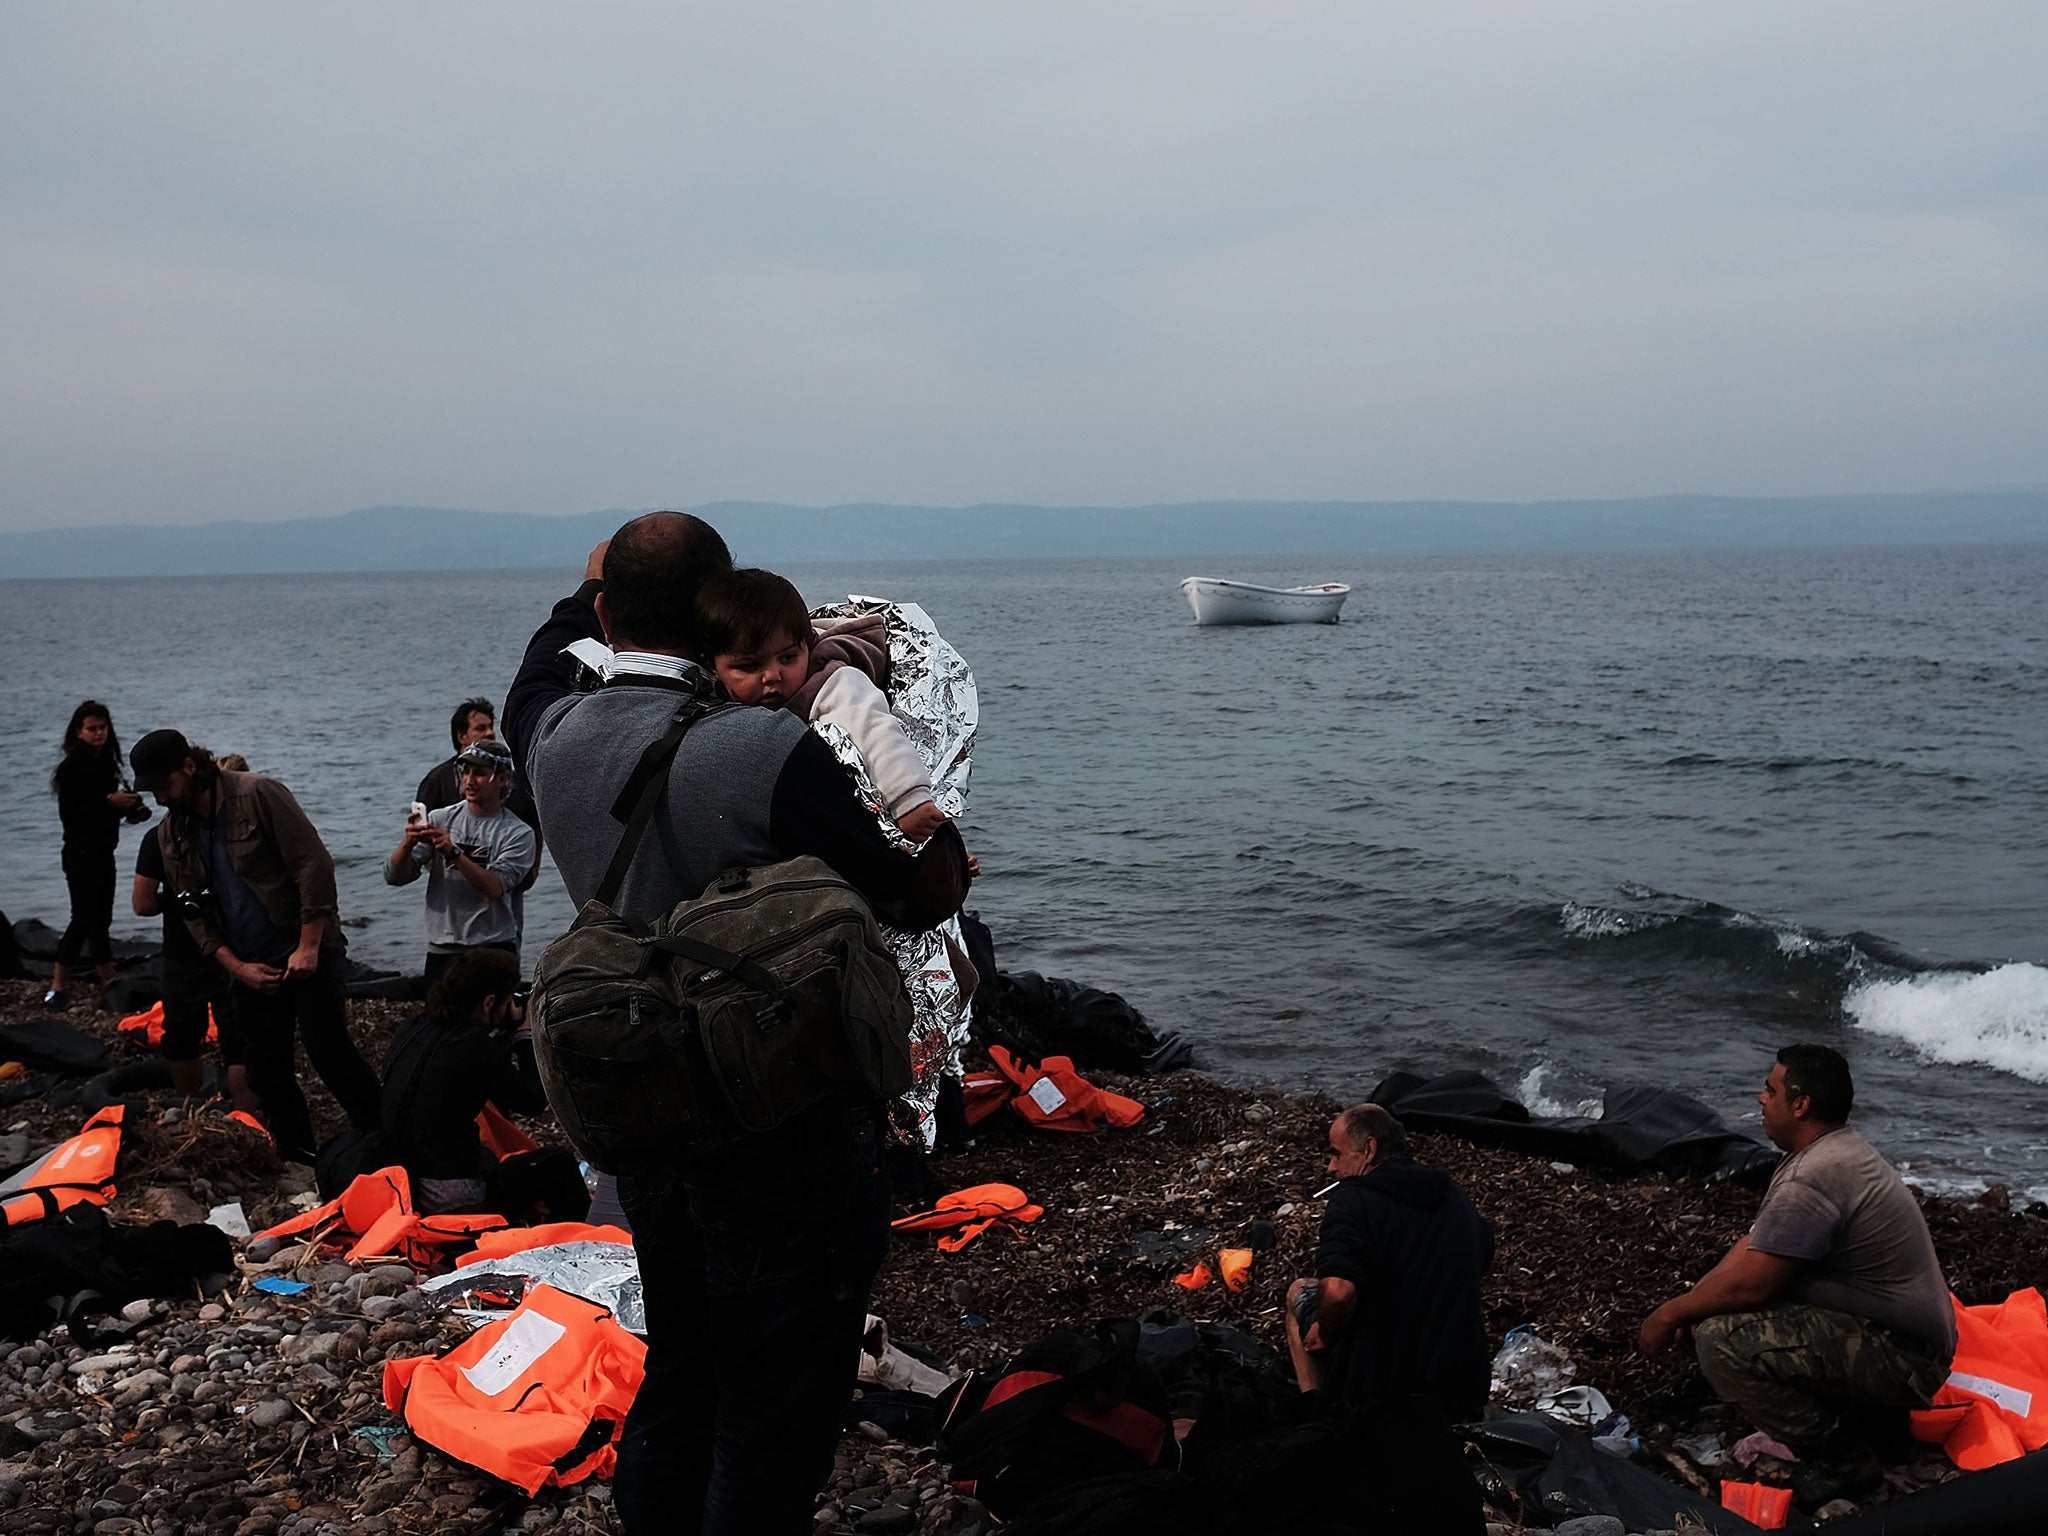 The weather is worsening but thousands of people continue to attempt voyages to the Greek islands